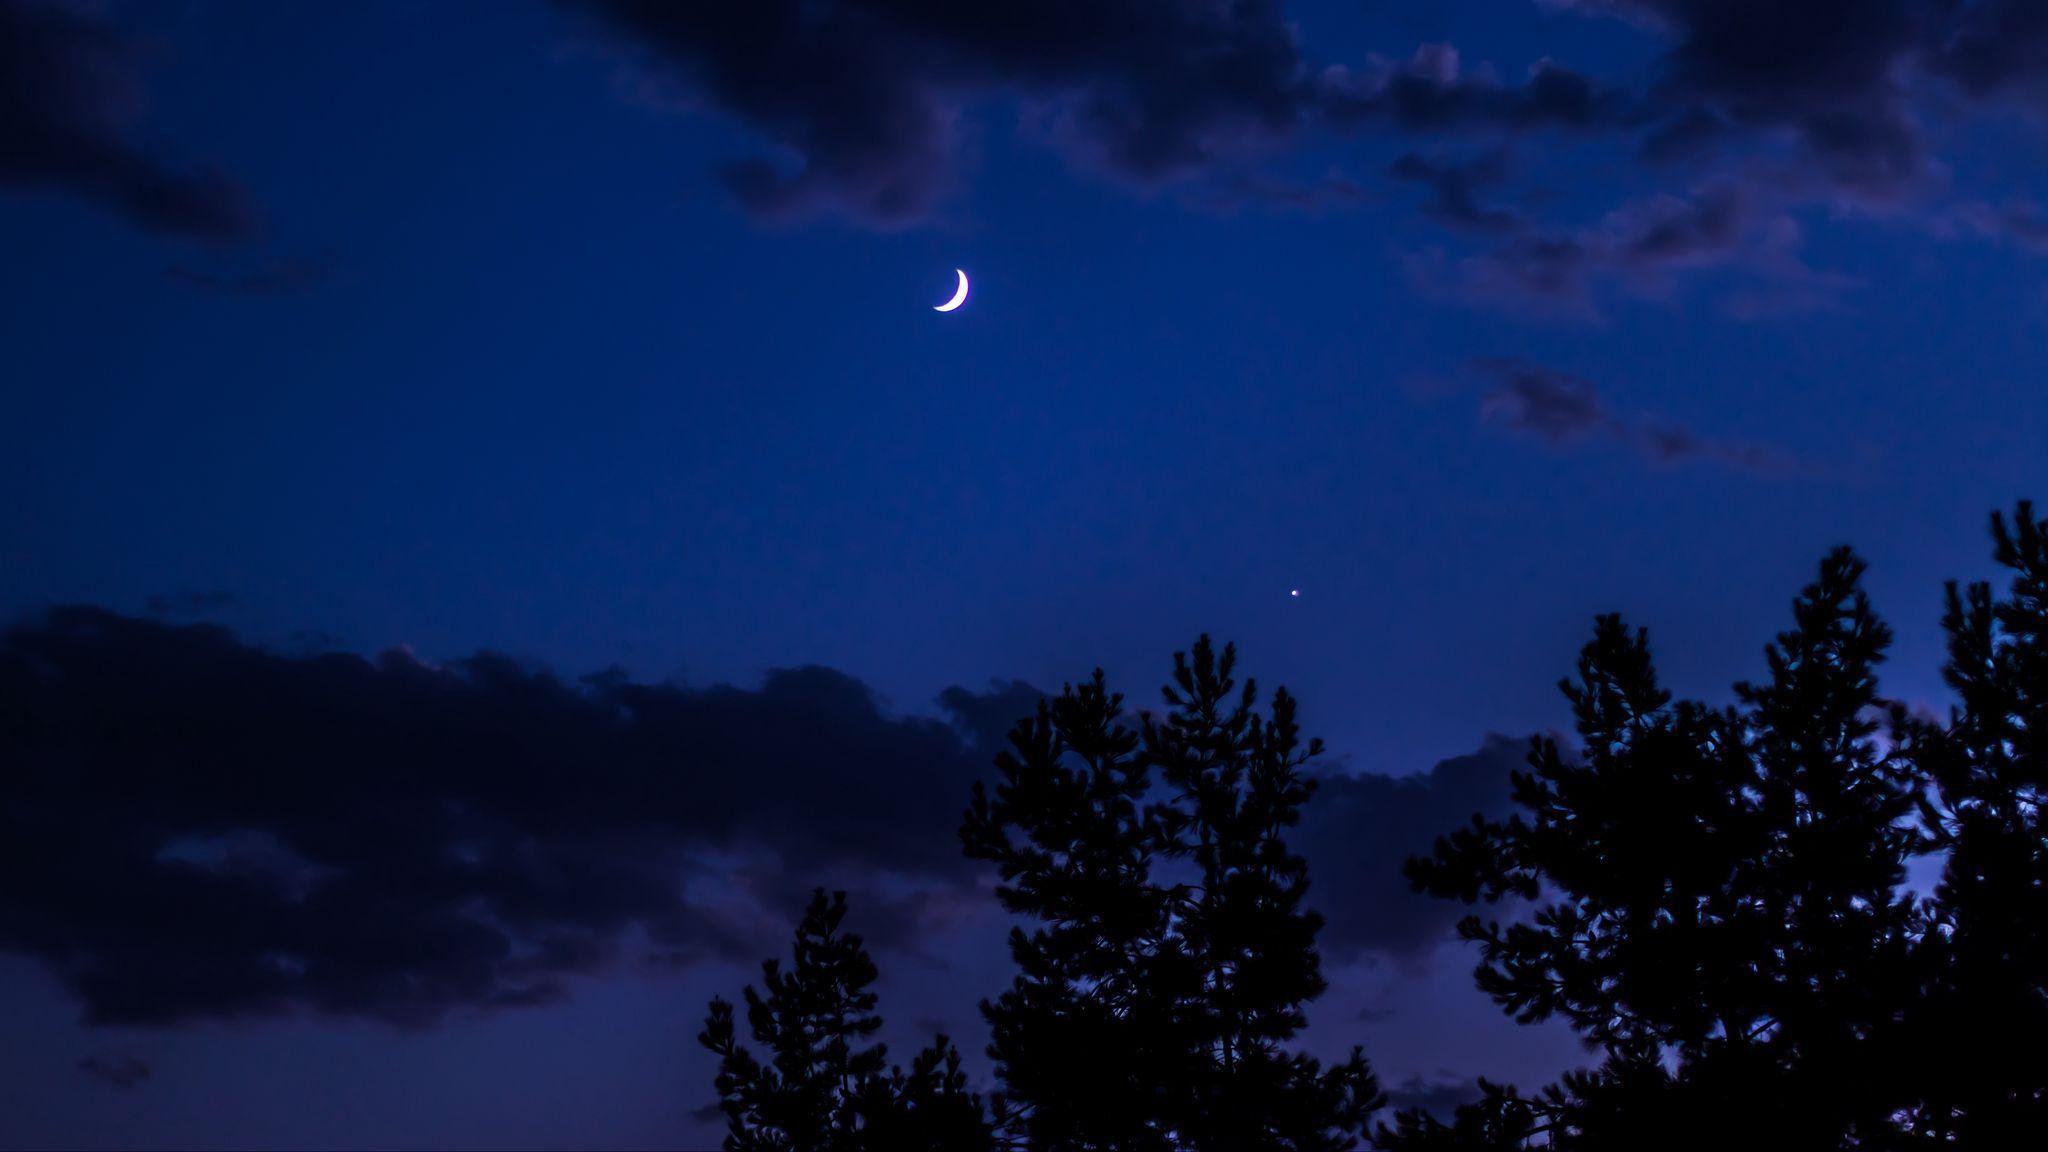 A crescent moon in a blue sky with trees in the foreground. - 2048x1152